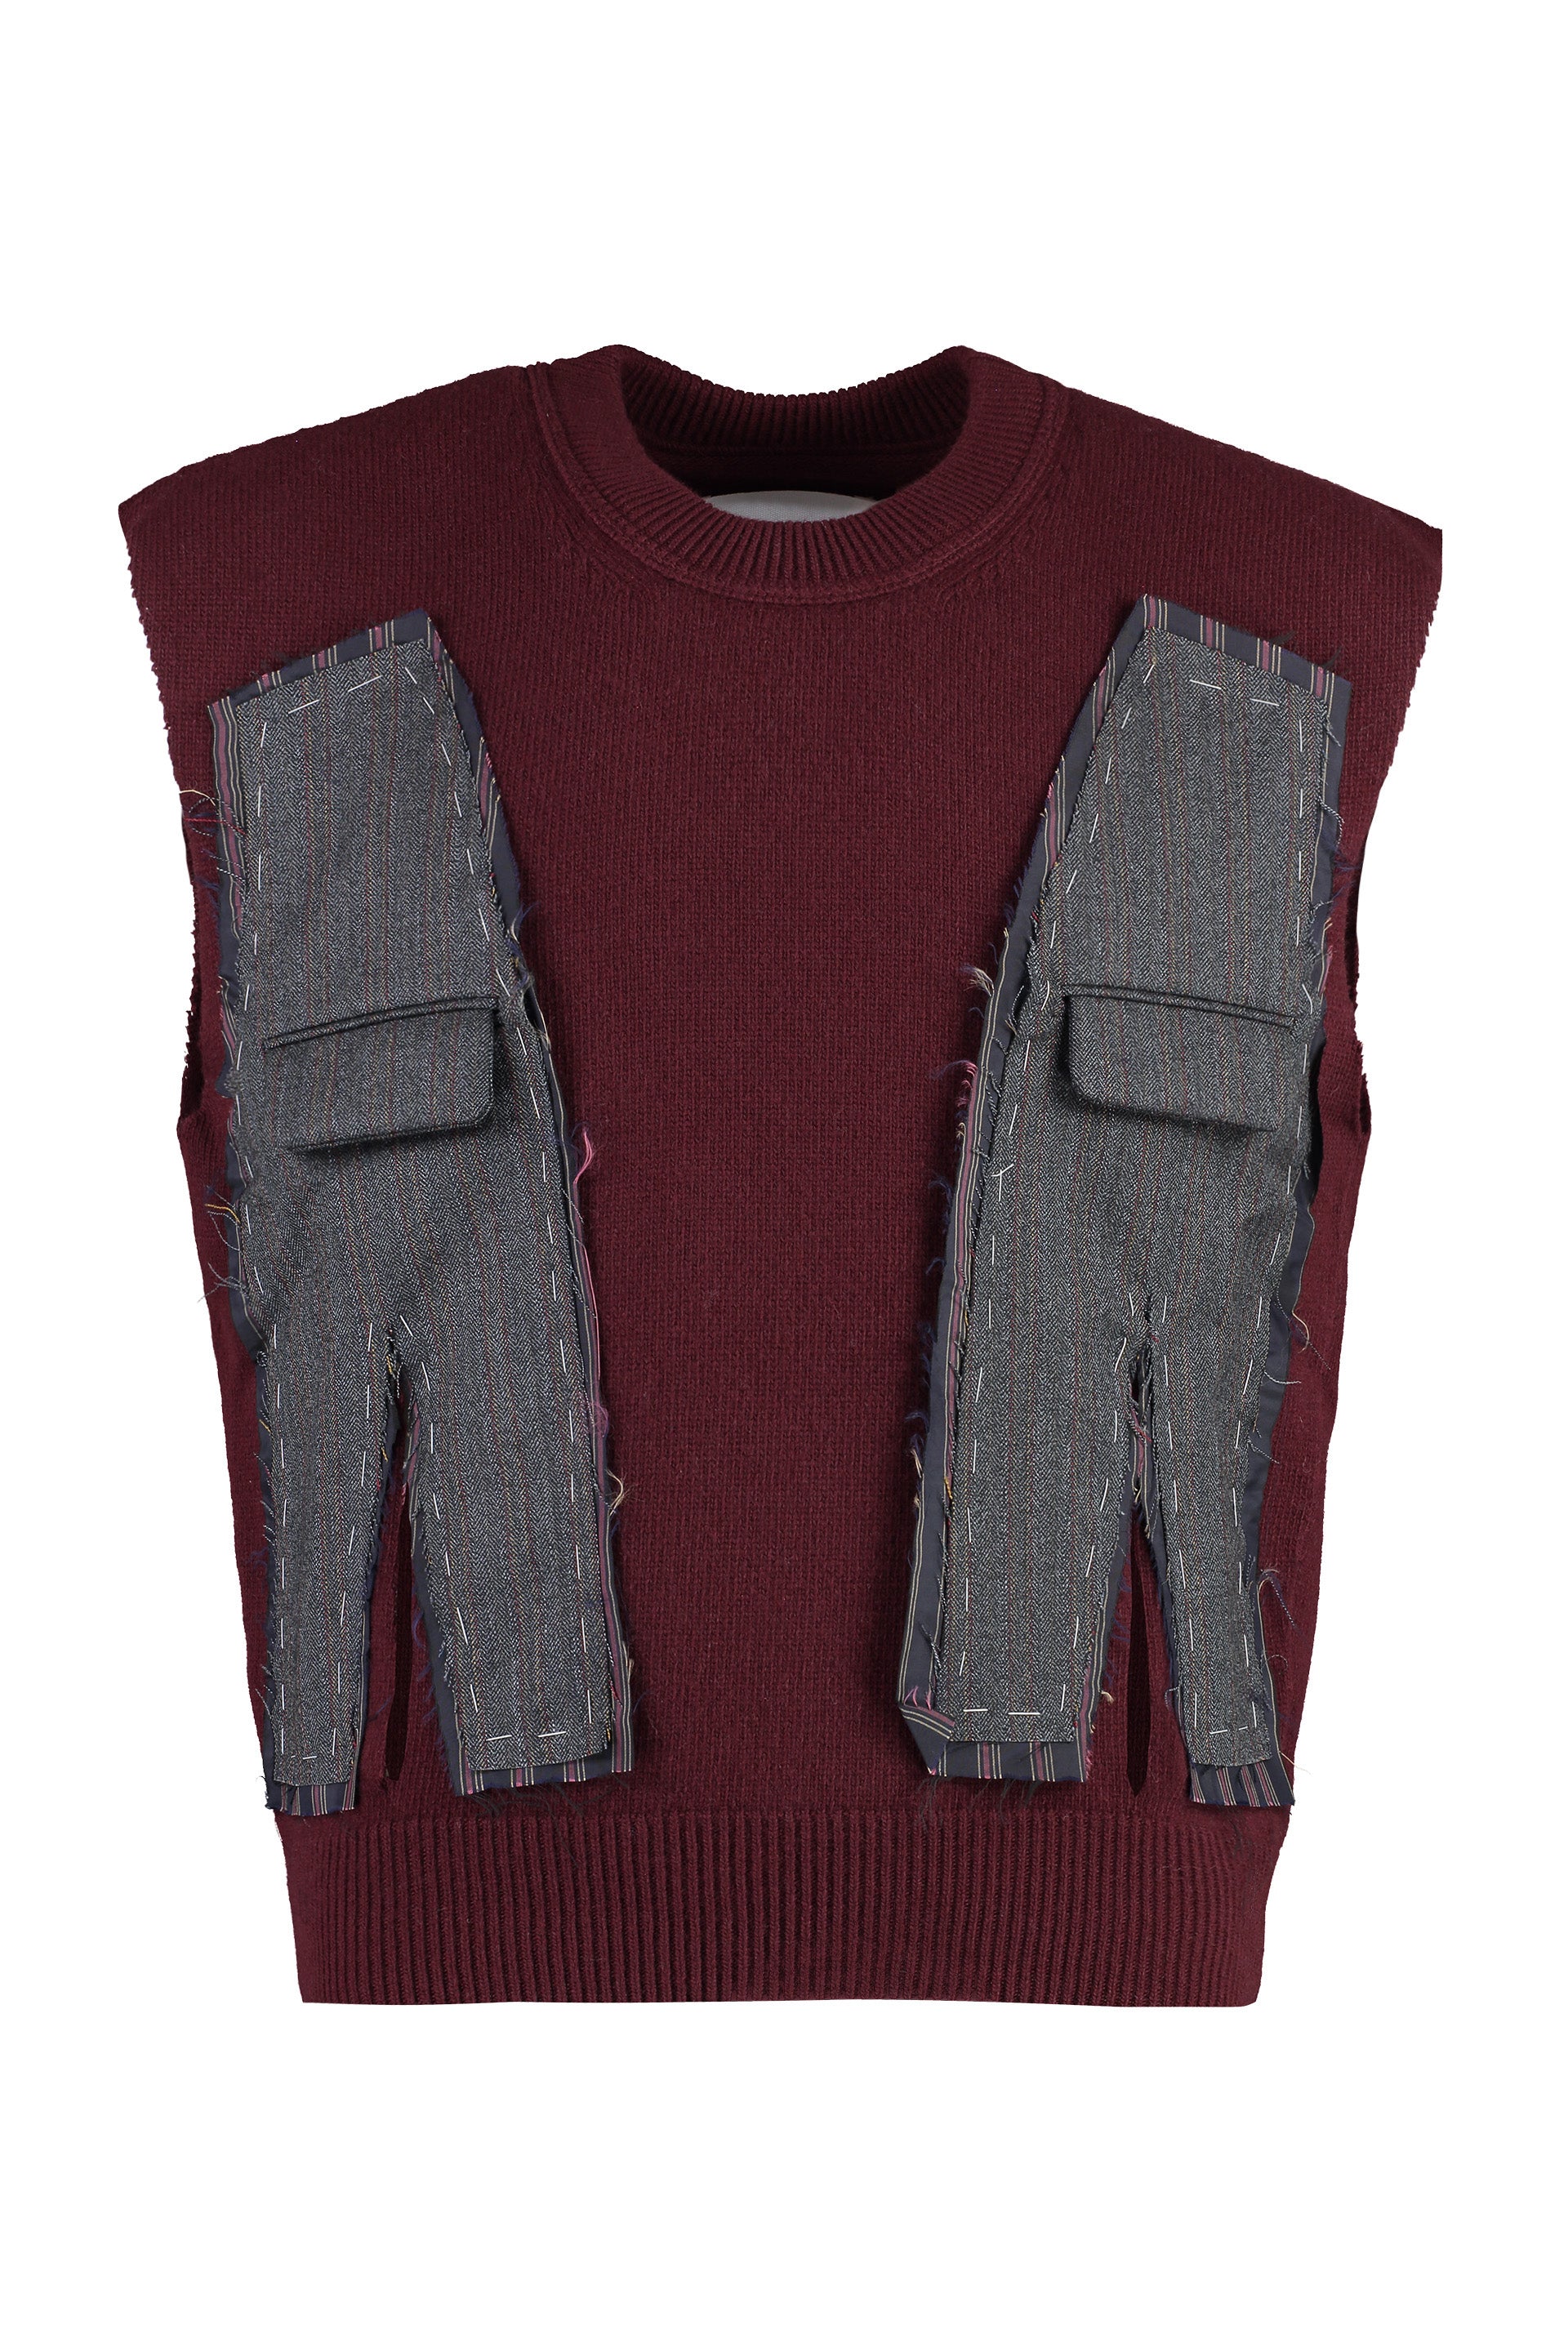 Maison Margiela Burgundy Knit Wool Vest For Men | Cut-out Front Details And Visible Stitching